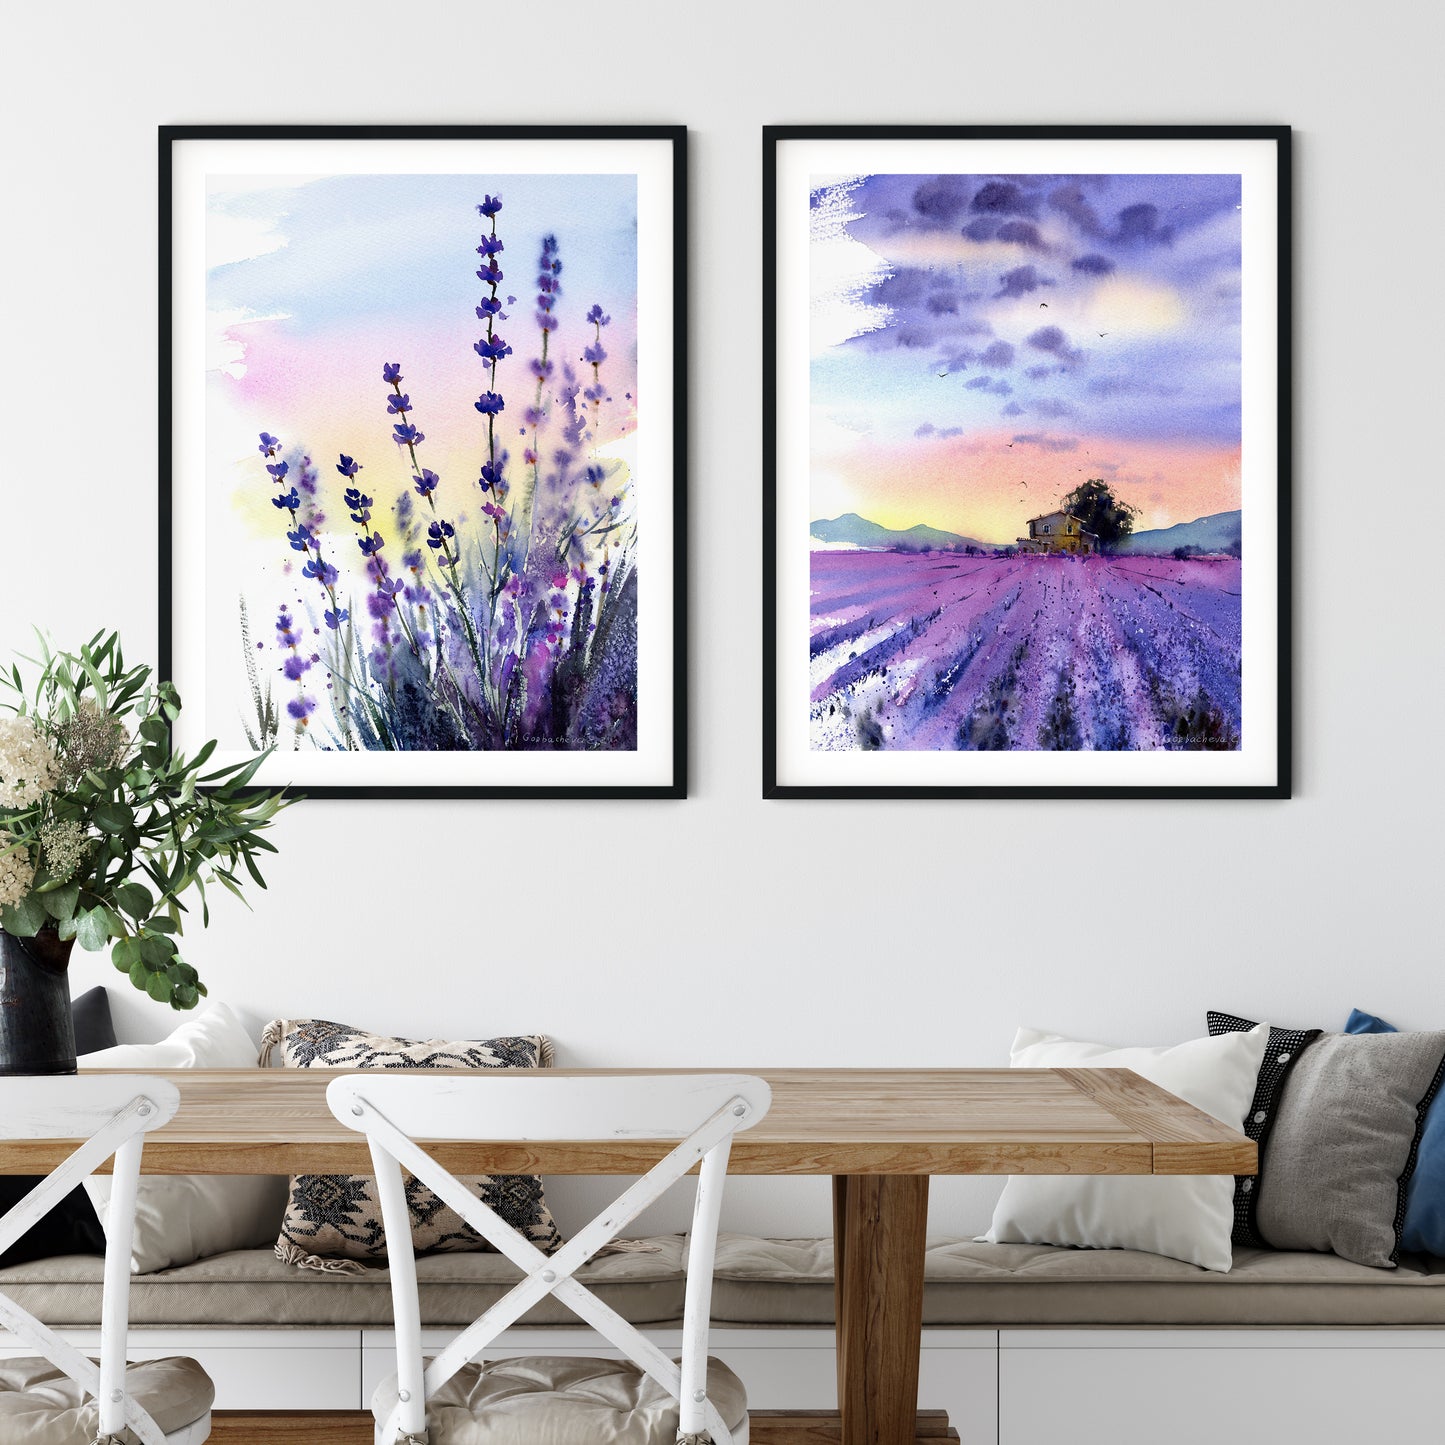 Lavender Landscape Wall Art, Set of 2 Flower Prints, Watercolor Lilac Decor, Country Living Room Wall Decor